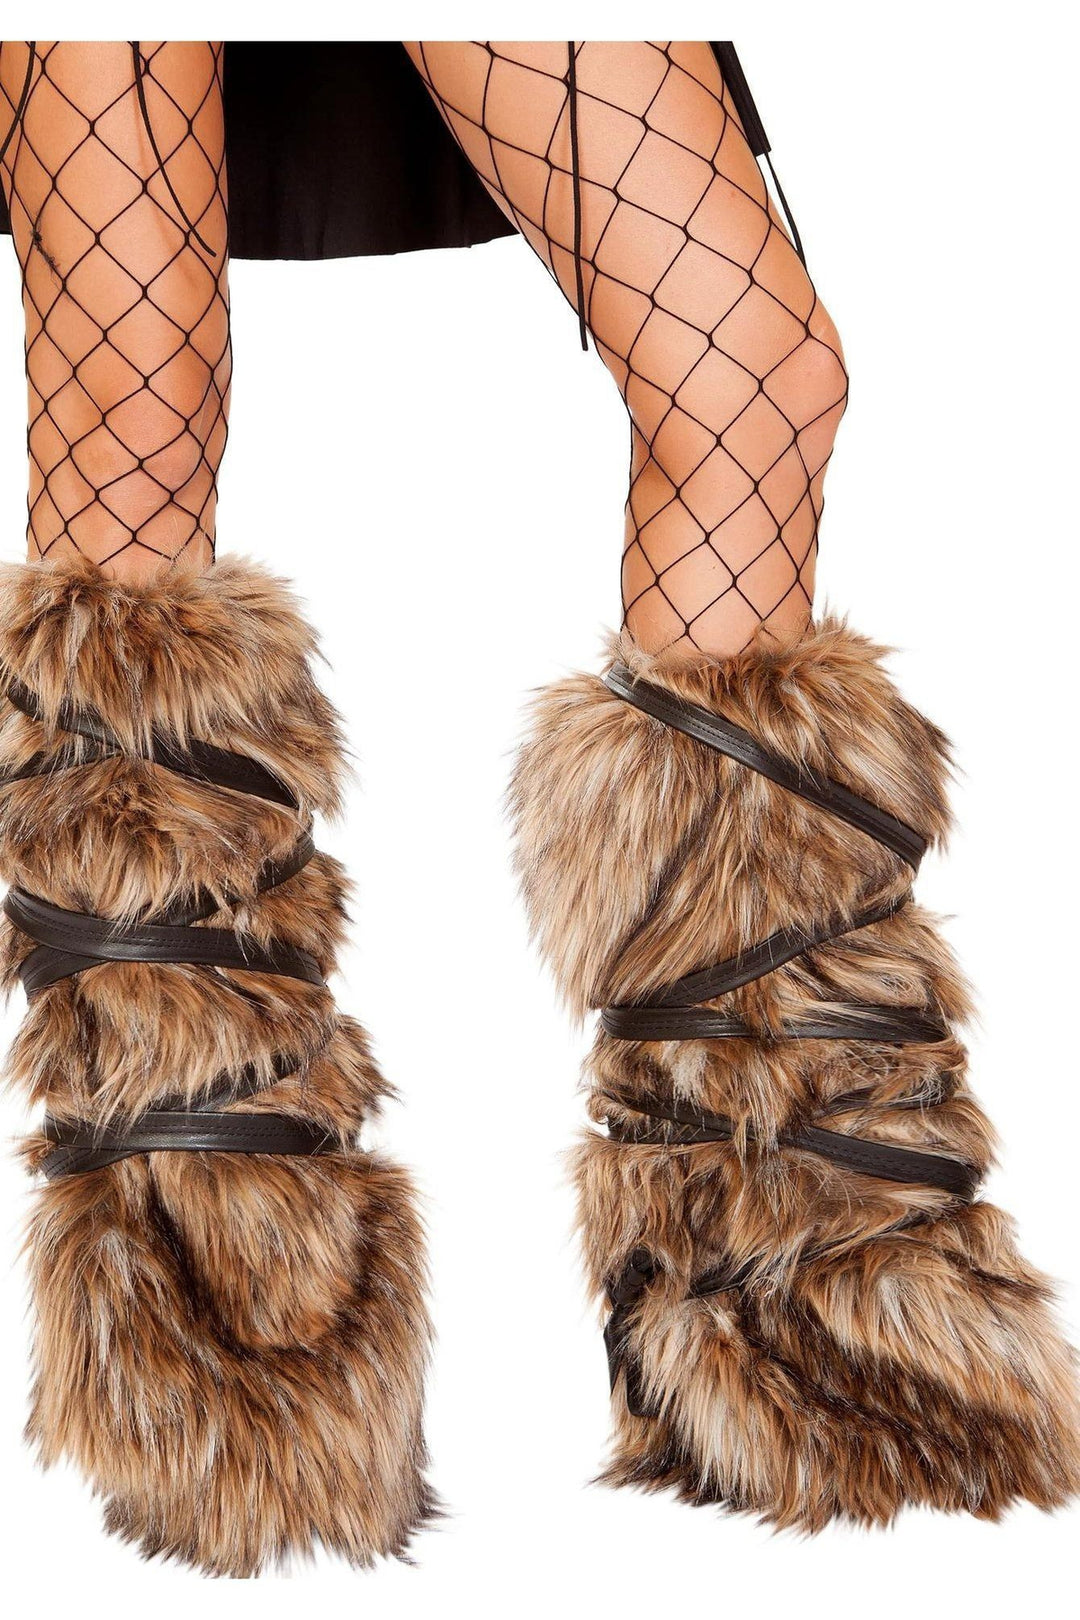 Roma Pair of Faux Fur Leg Warmers with Strap Detail-SEXYSHOES.COM